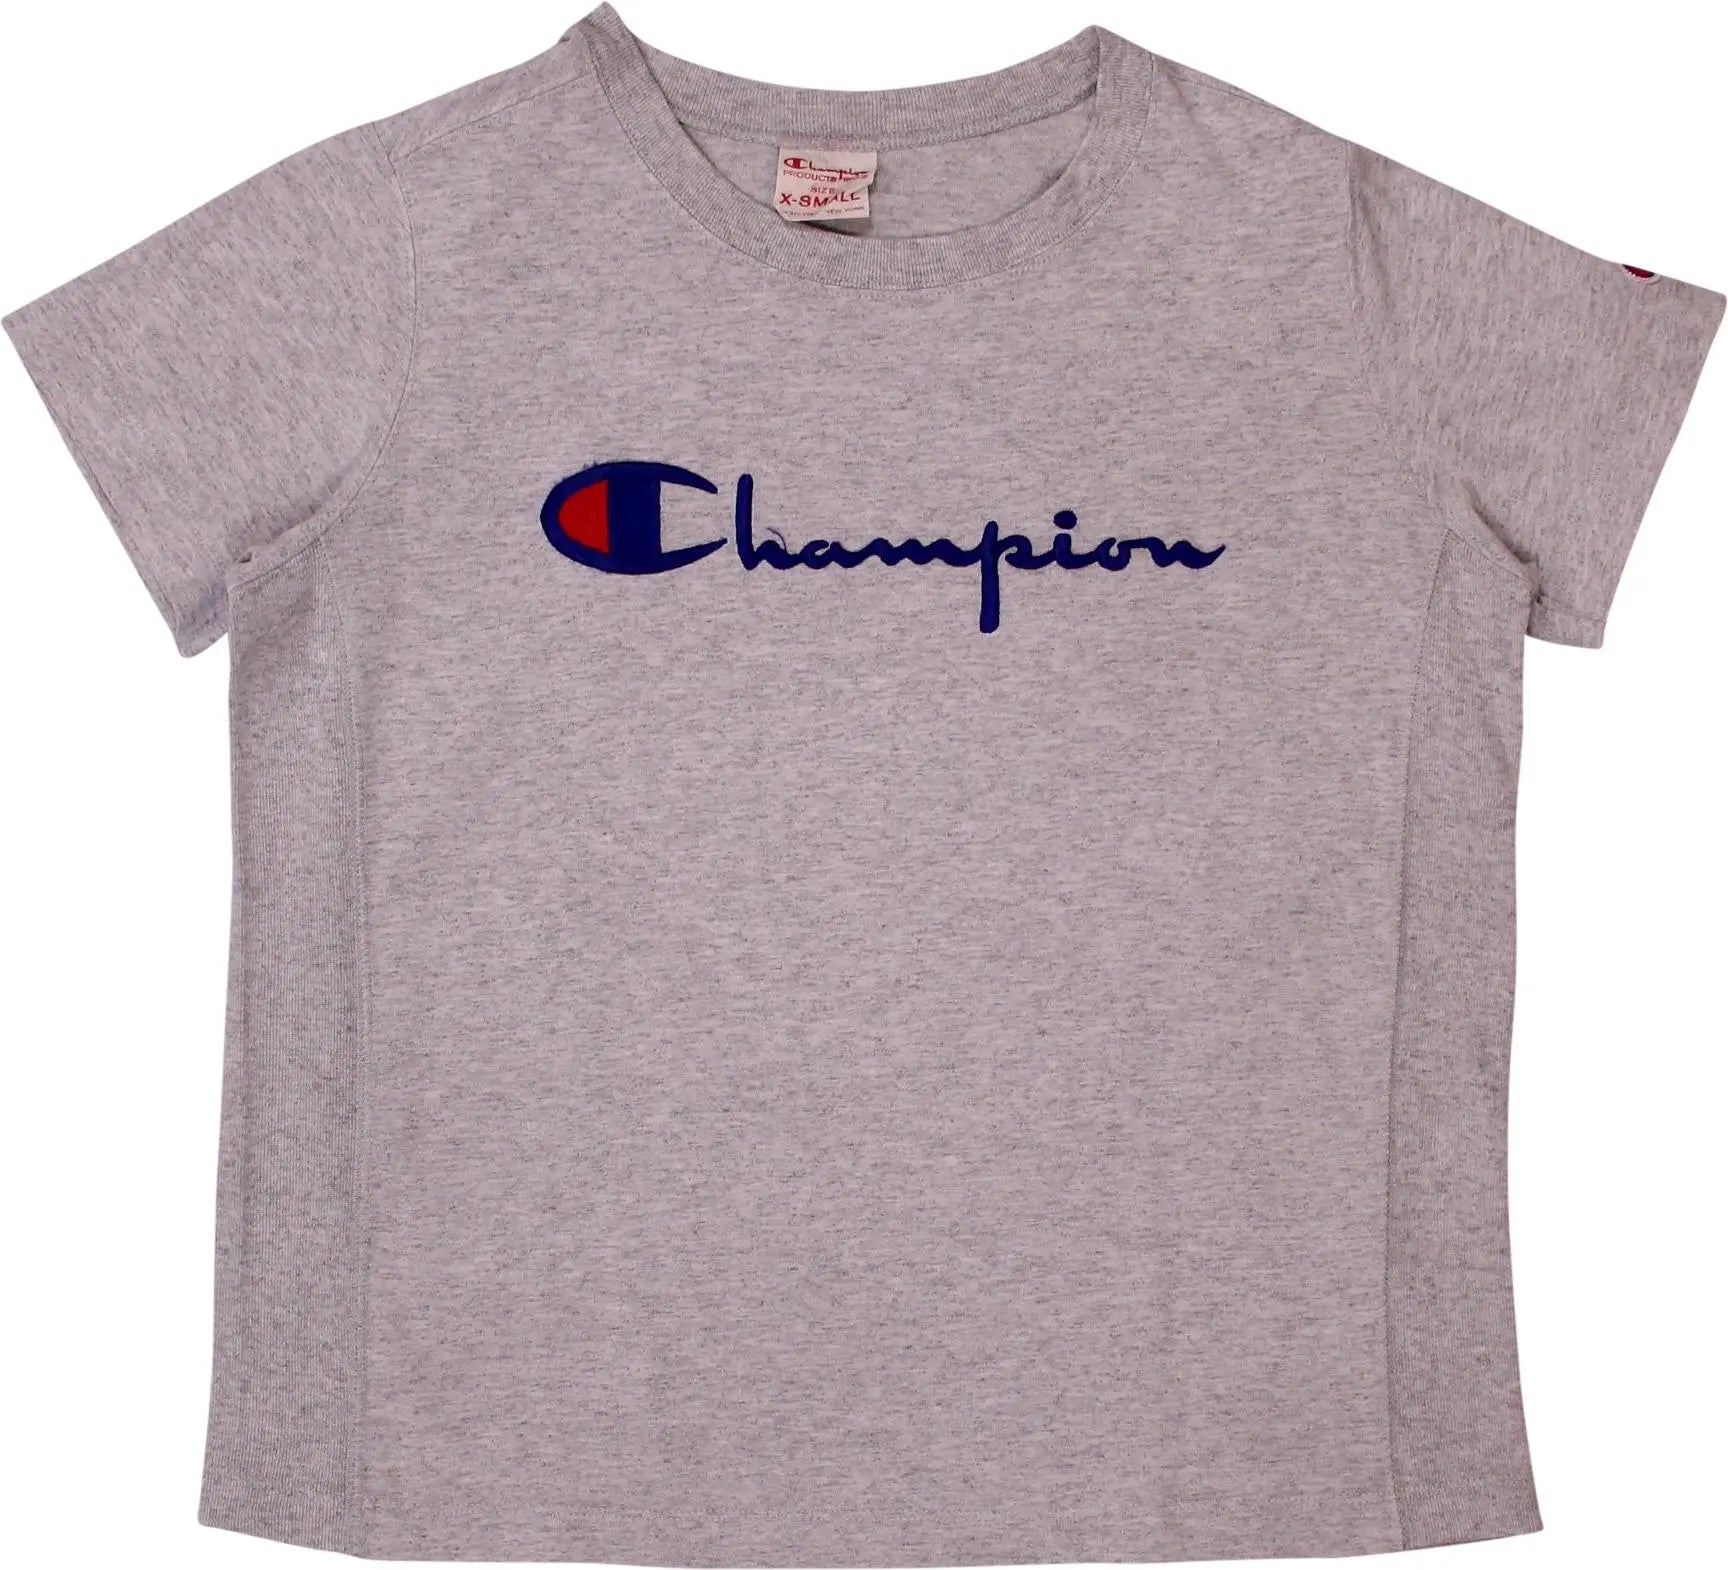 Champion - Grey Vintage T-shirt by Champion- ThriftTale.com - Vintage and second handclothing